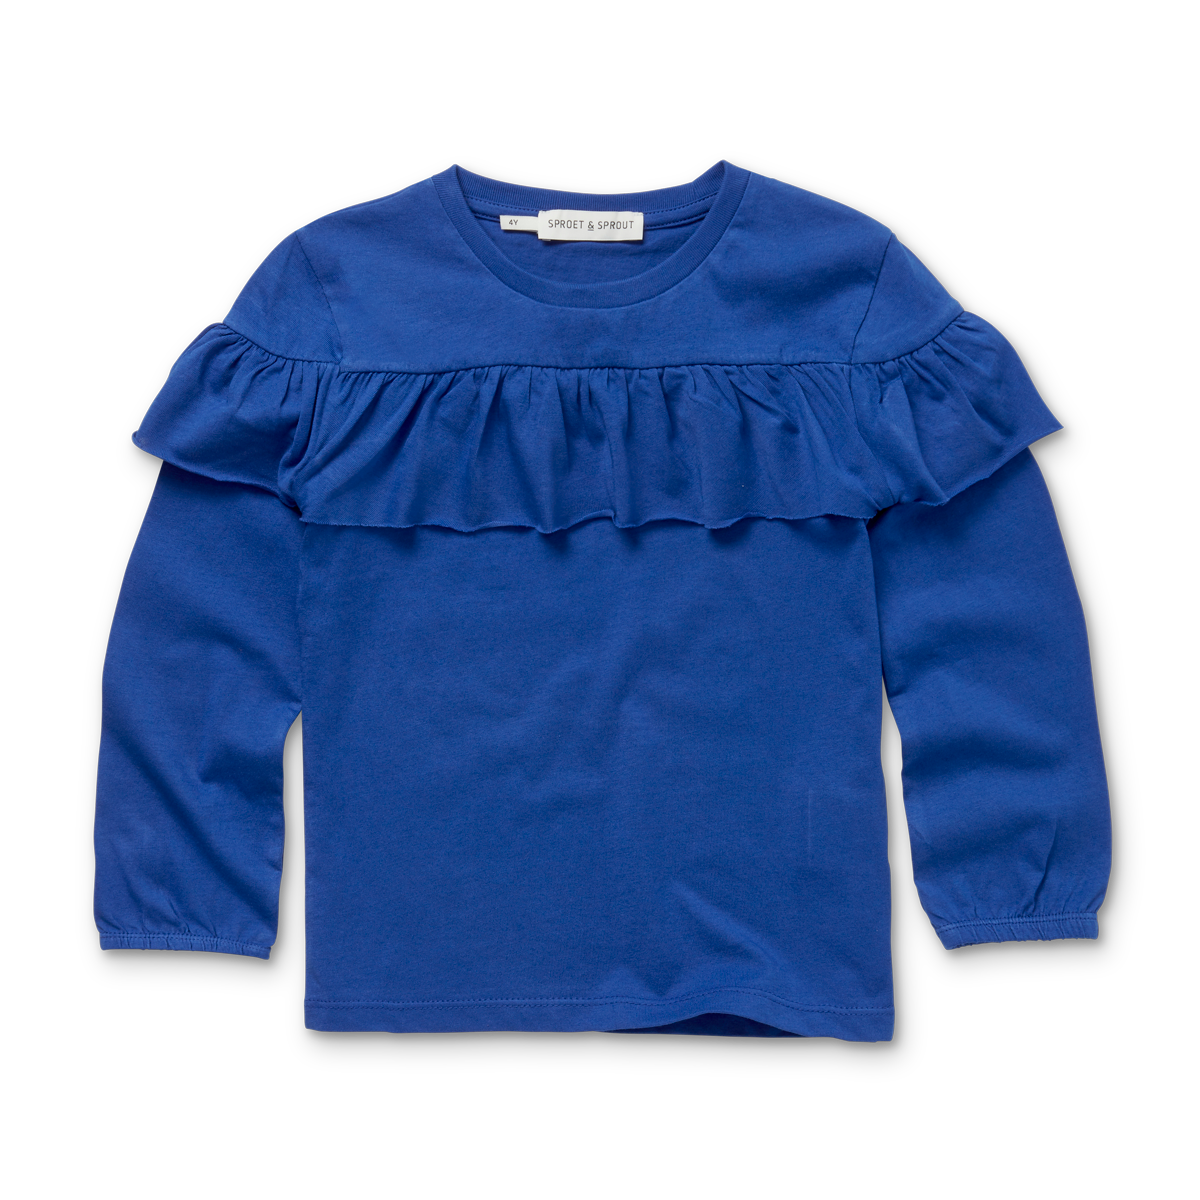 T-shirt ruffle ultra blue - Sproet Sprout